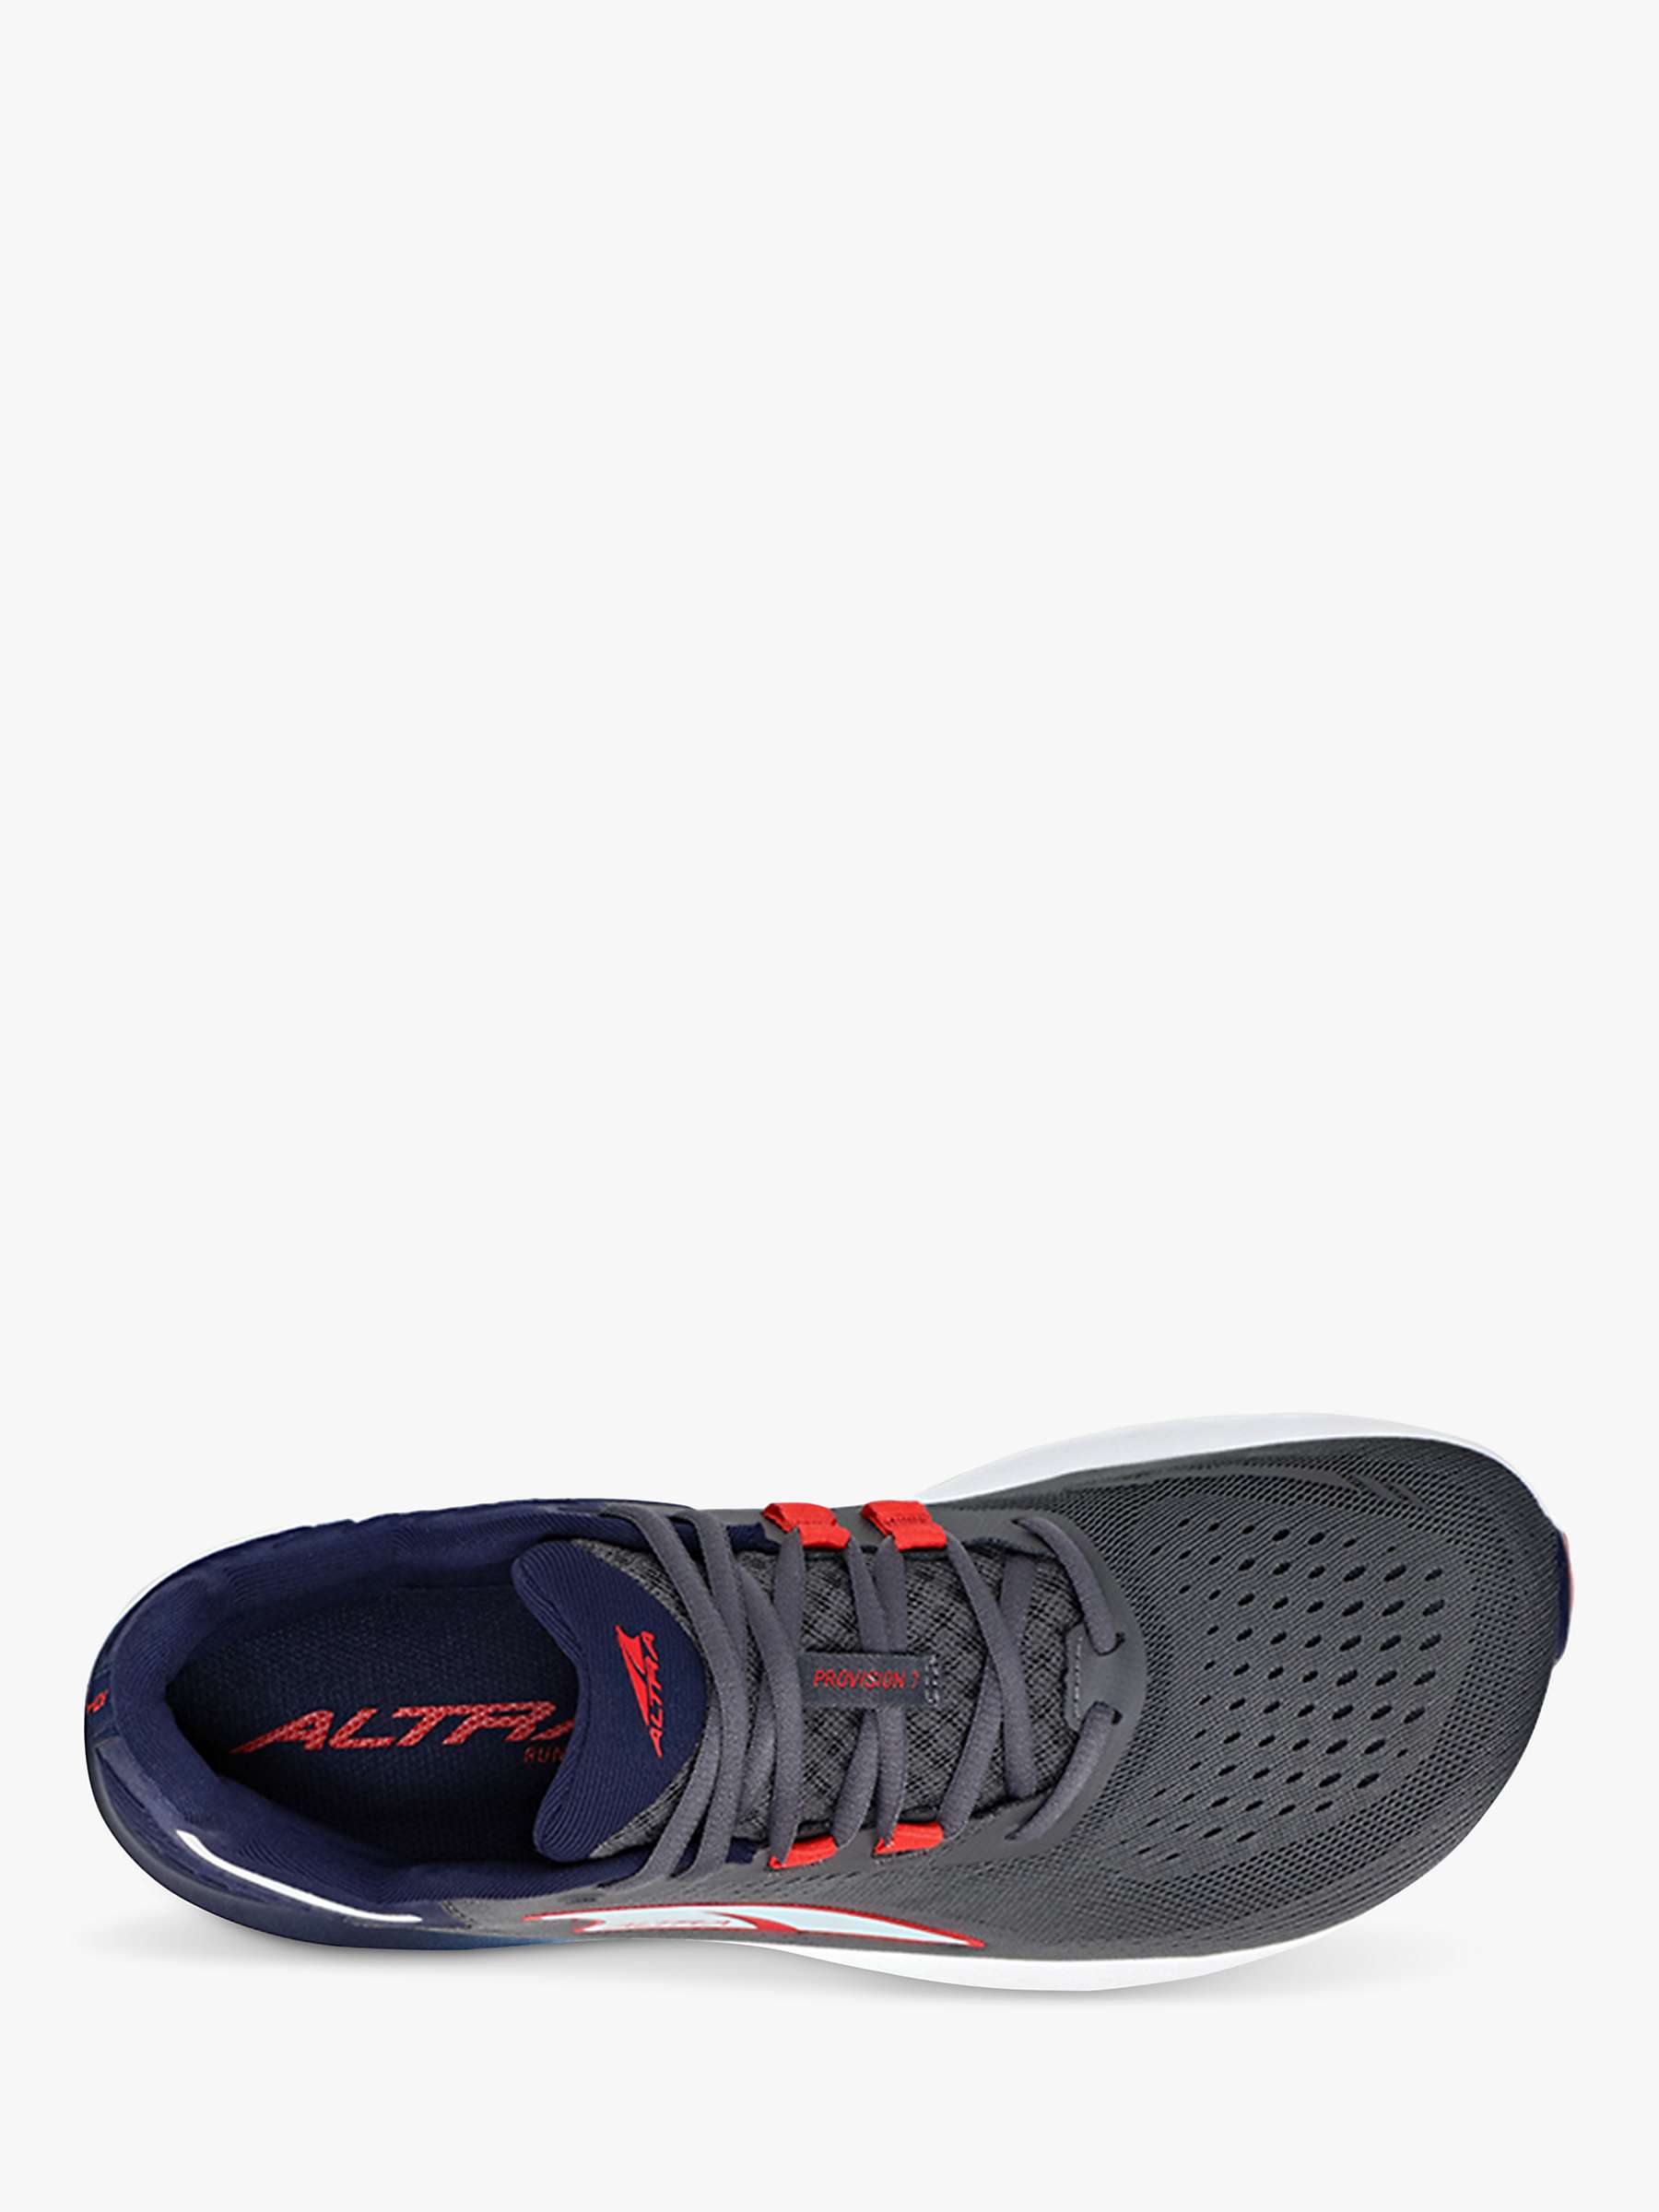 Buy Altra Provision 7 Men's Running Shoes Online at johnlewis.com